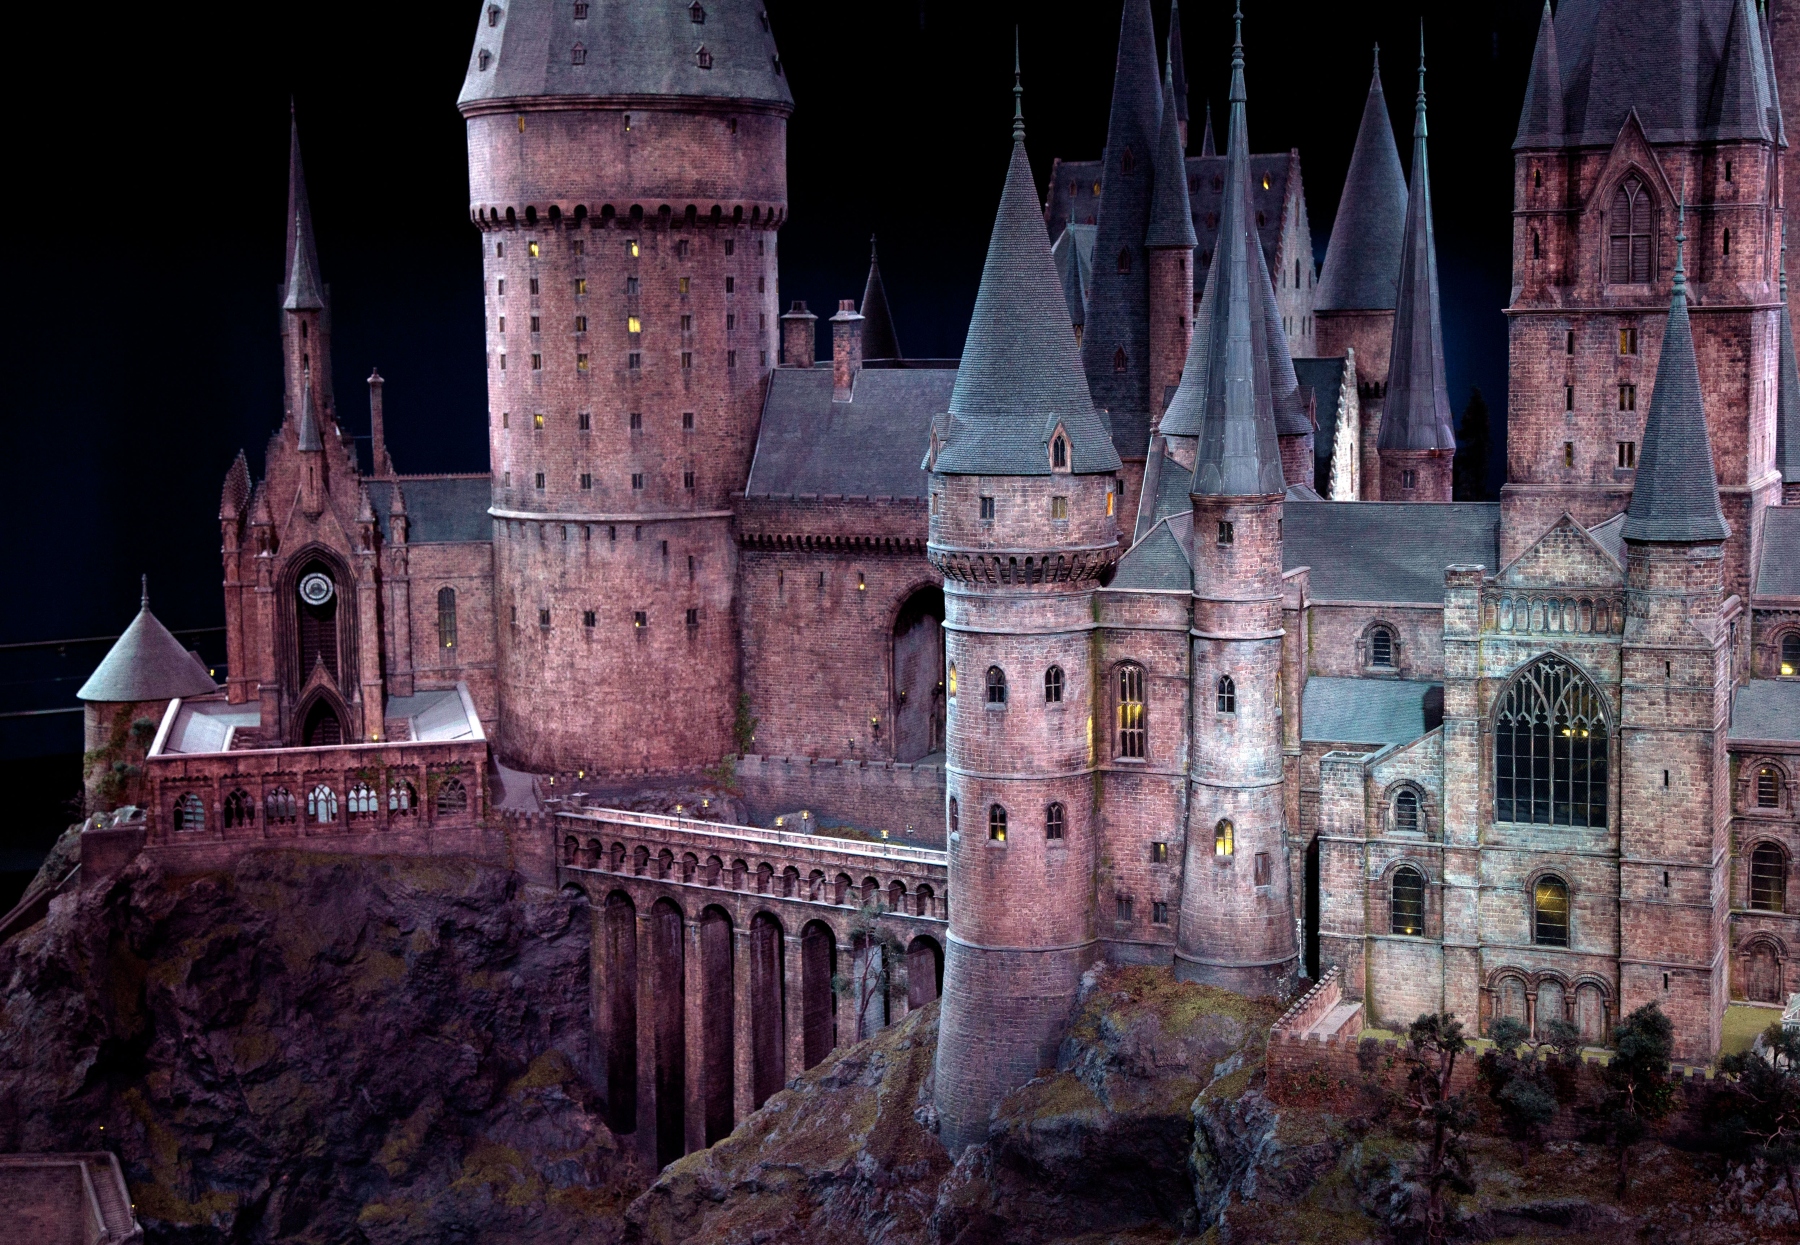 Scale model of Hogwarts from all 7 'Harry Potter' movies